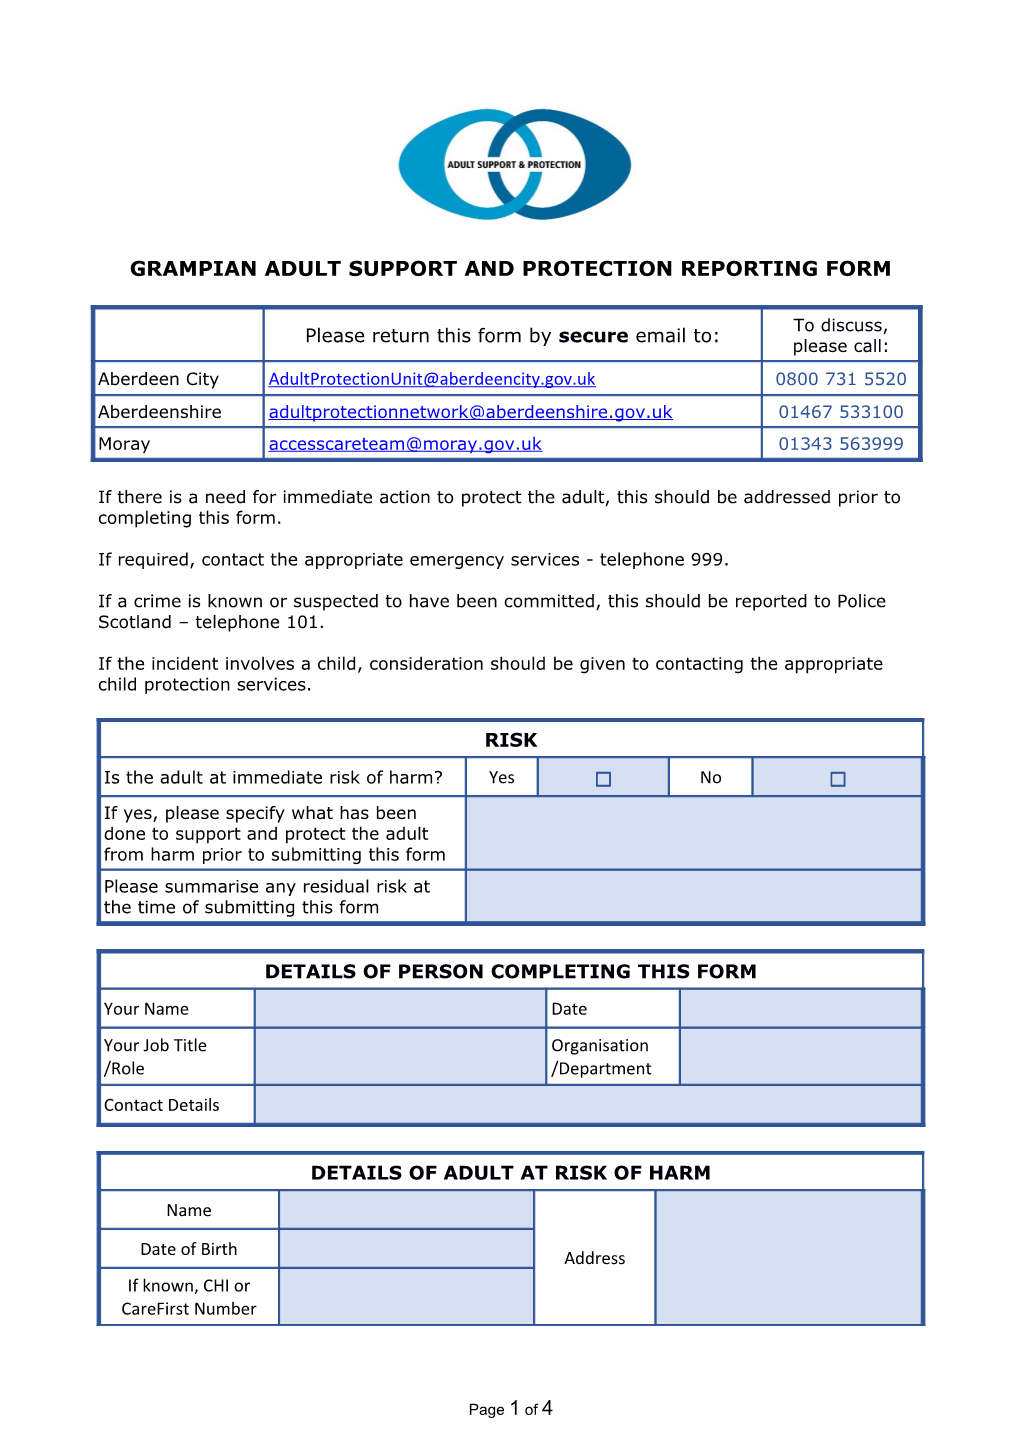 Grampian Adult Support and Protection Reporting Form